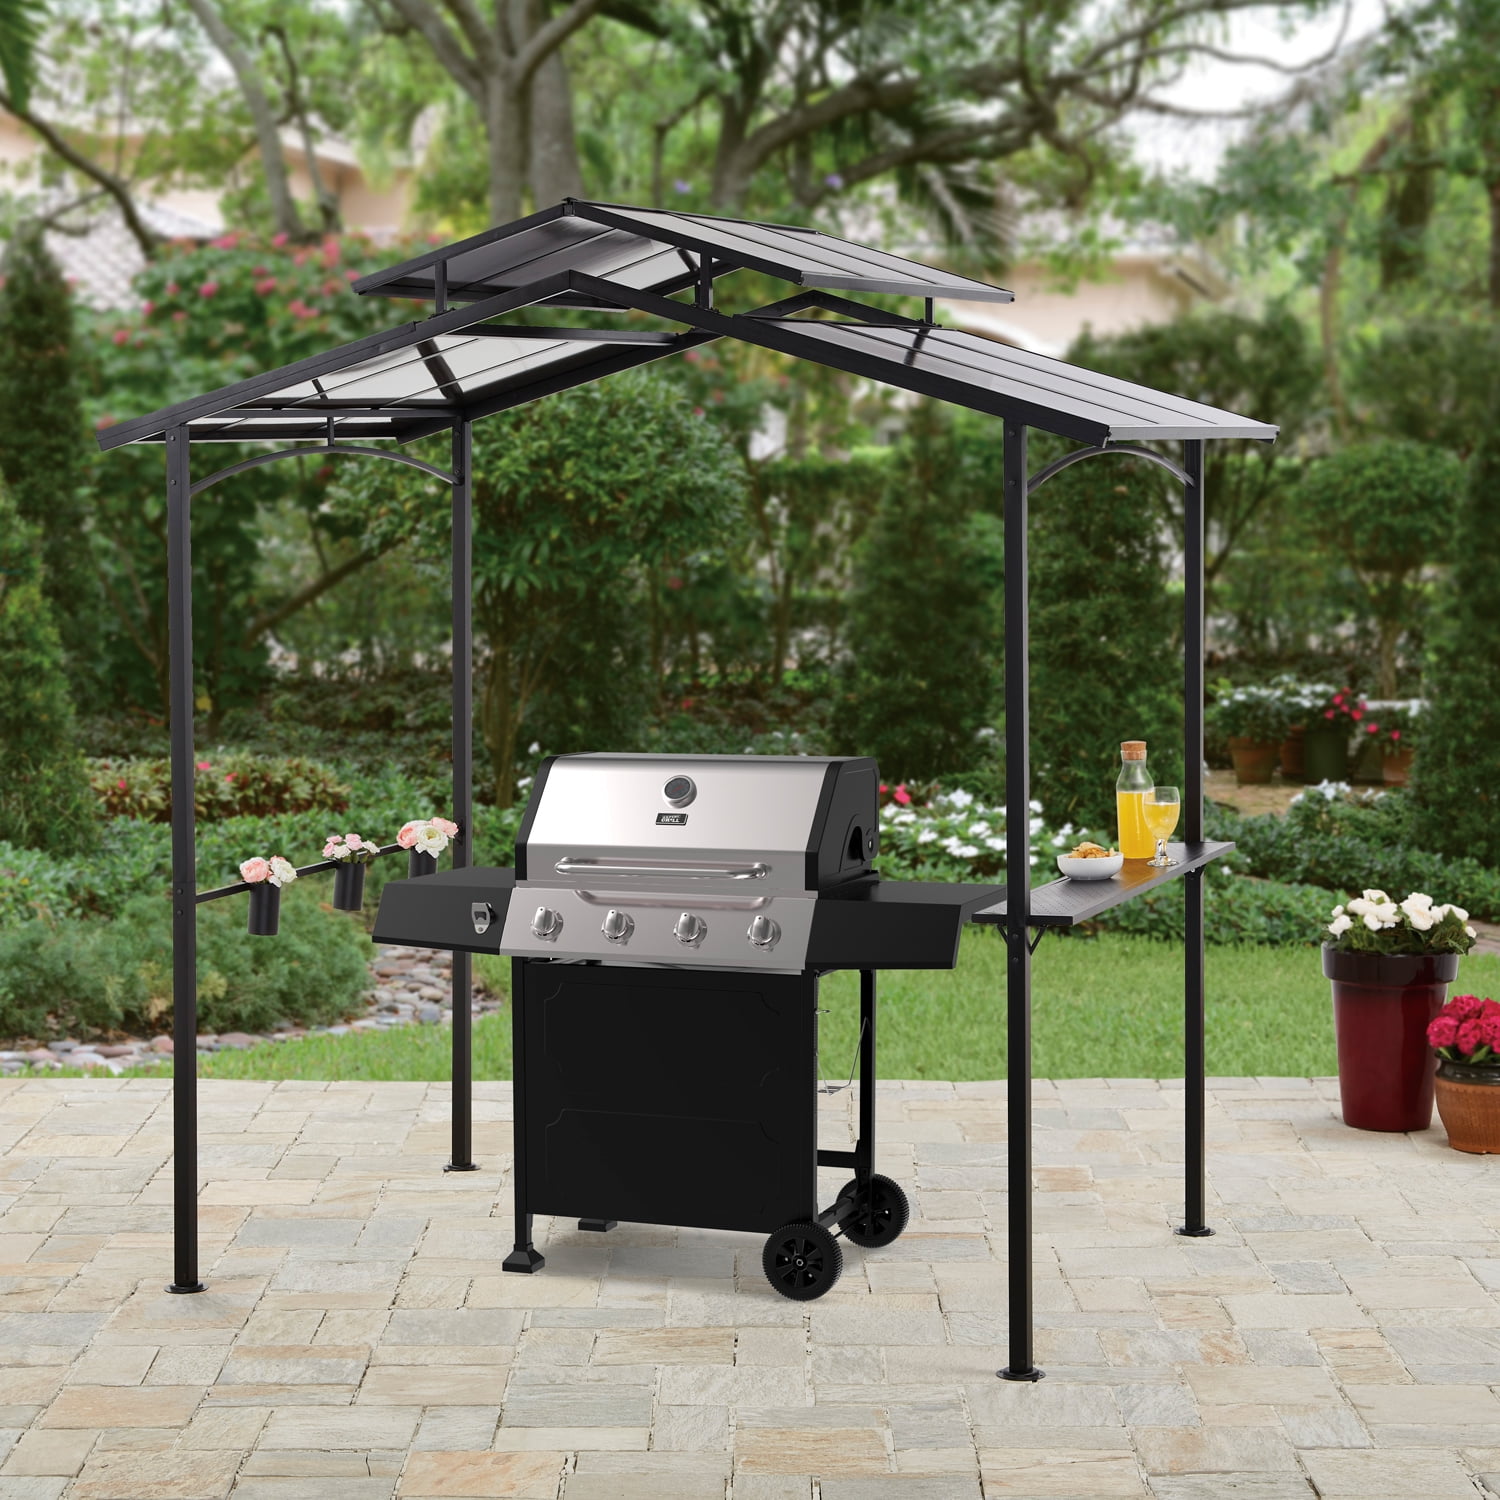 BBQ Grill Gazebo Replacement Canopy Hard Top 5x8 Heavy Duty for Patios Garden 